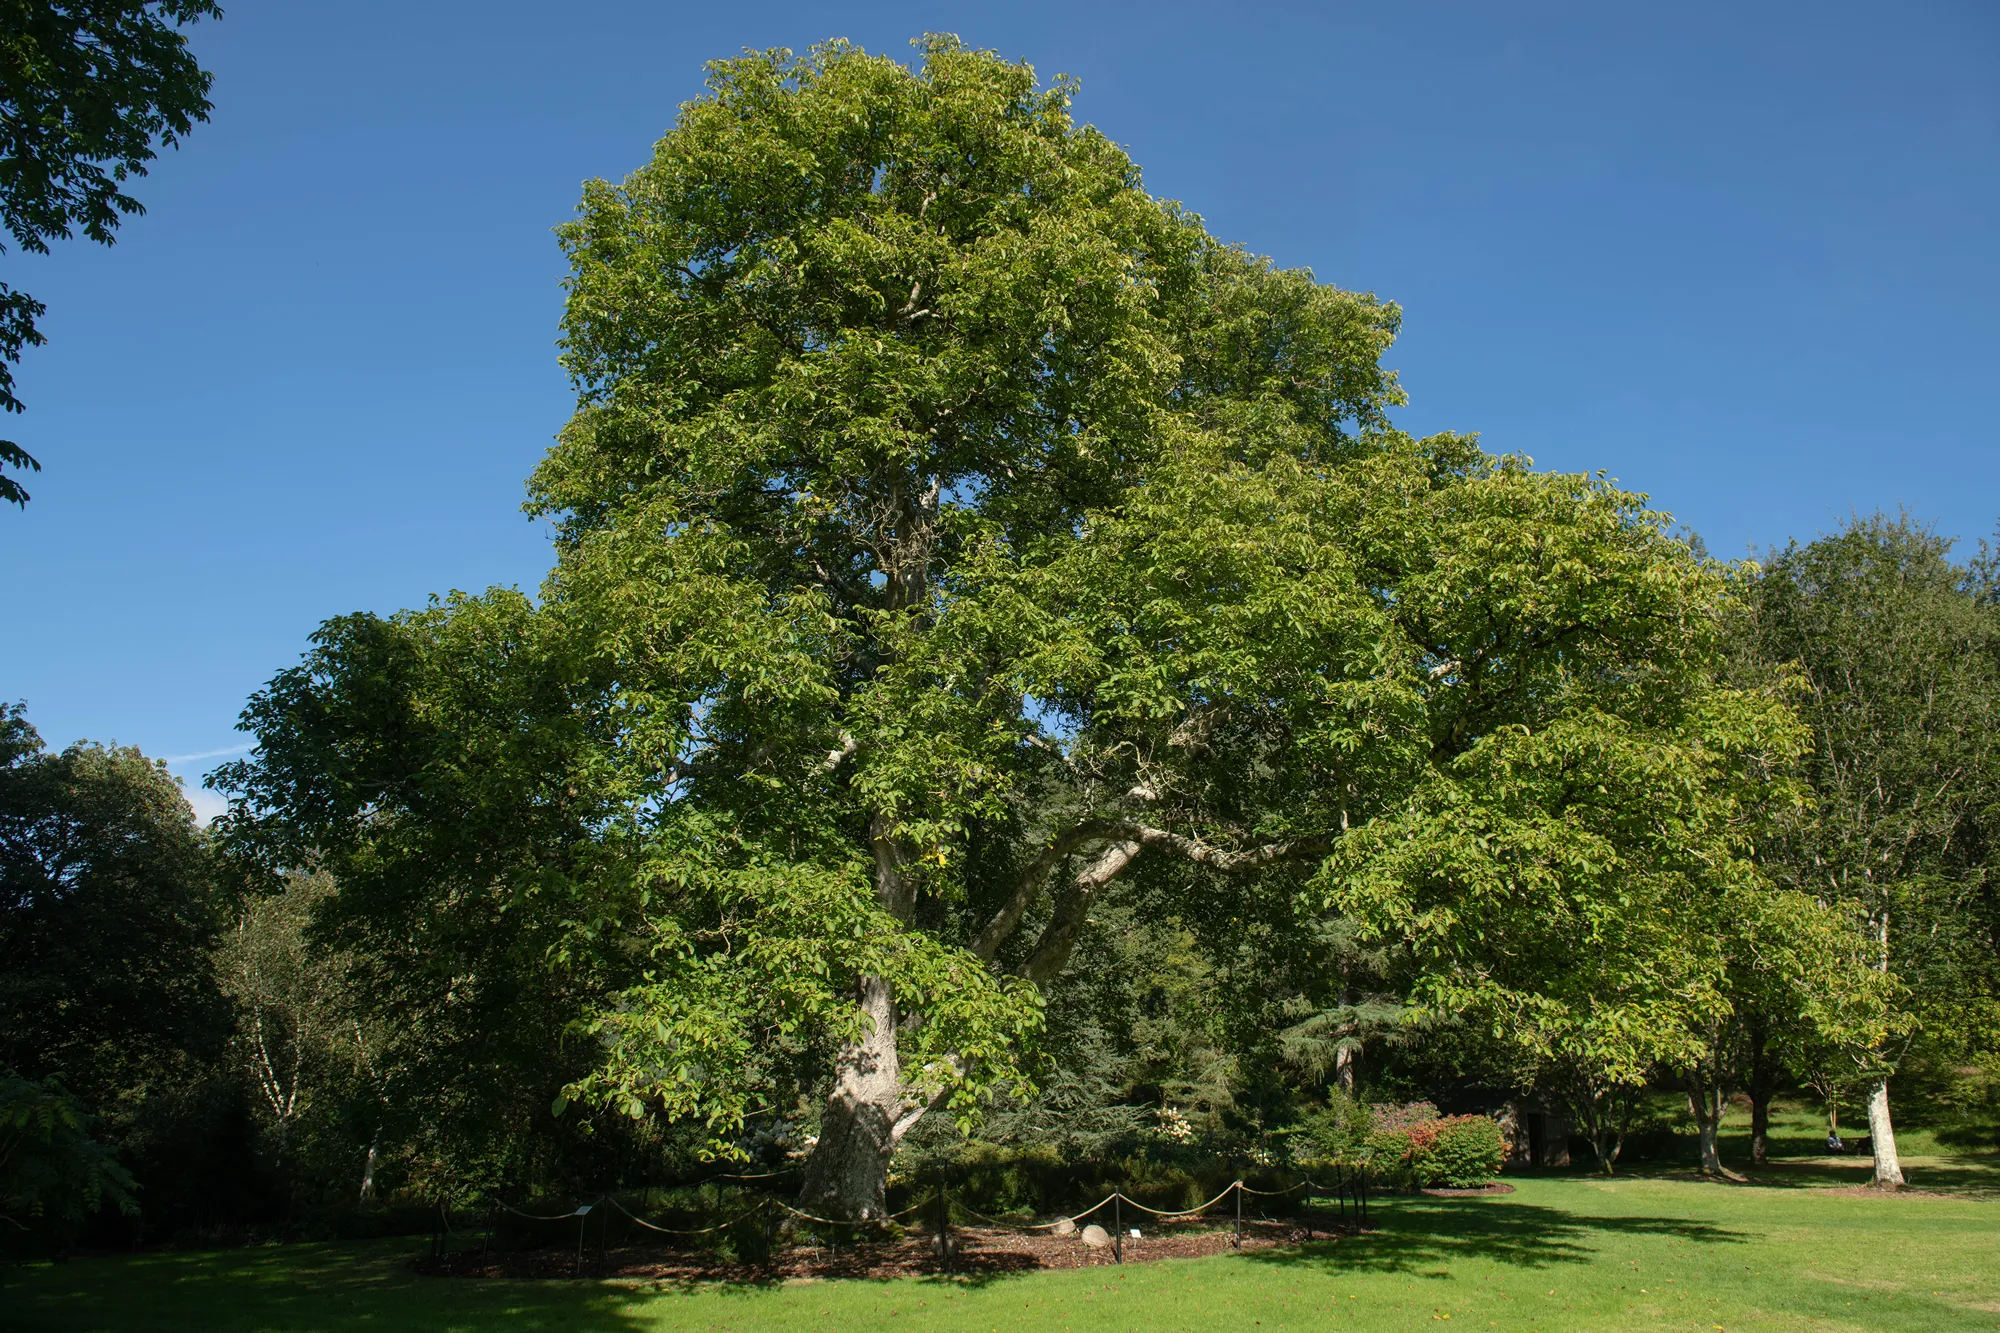 Summer Green Leaves on an Ancient Common, Persian or English Walnut Tree (Juglans regia) Growing in a Woodland Garden with a Bright Blue Sky background in Rural Devon, England, UK